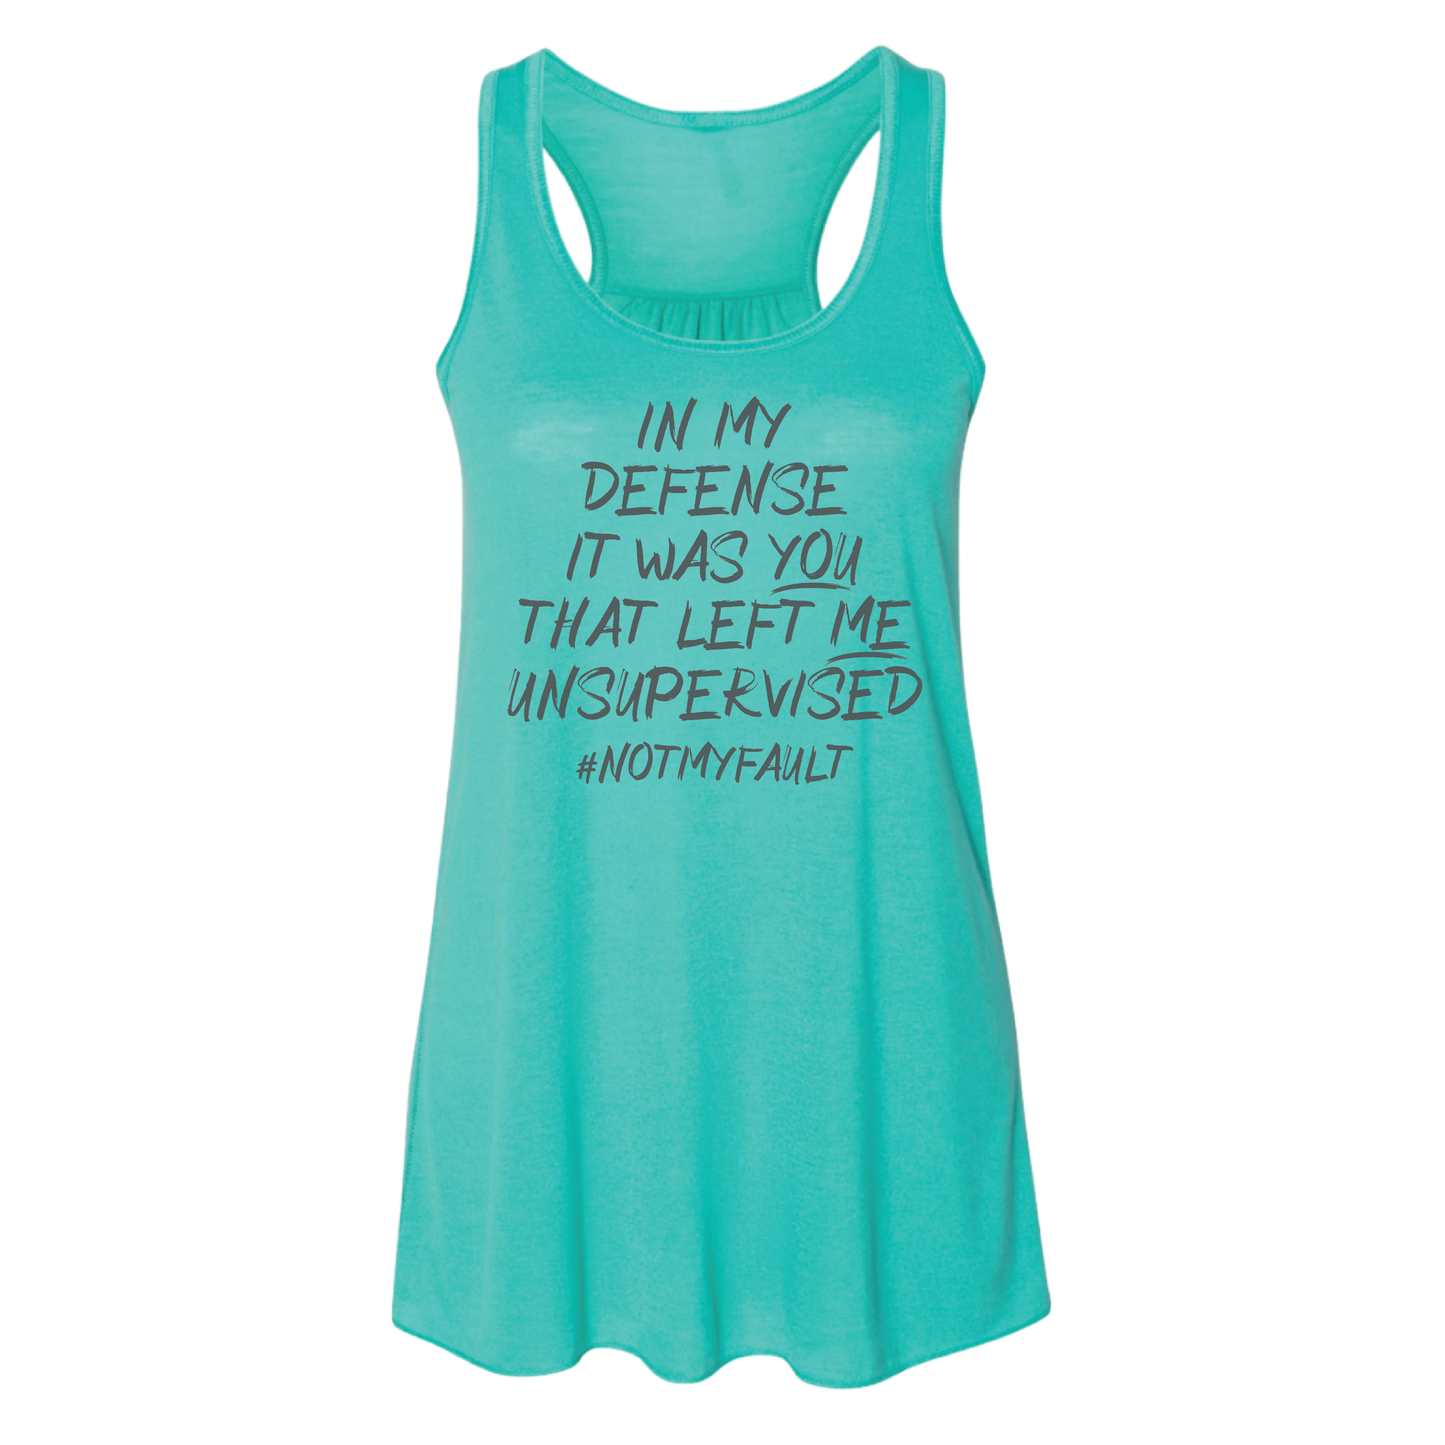 Unsupervised - Available in Multiple Colors & Styles